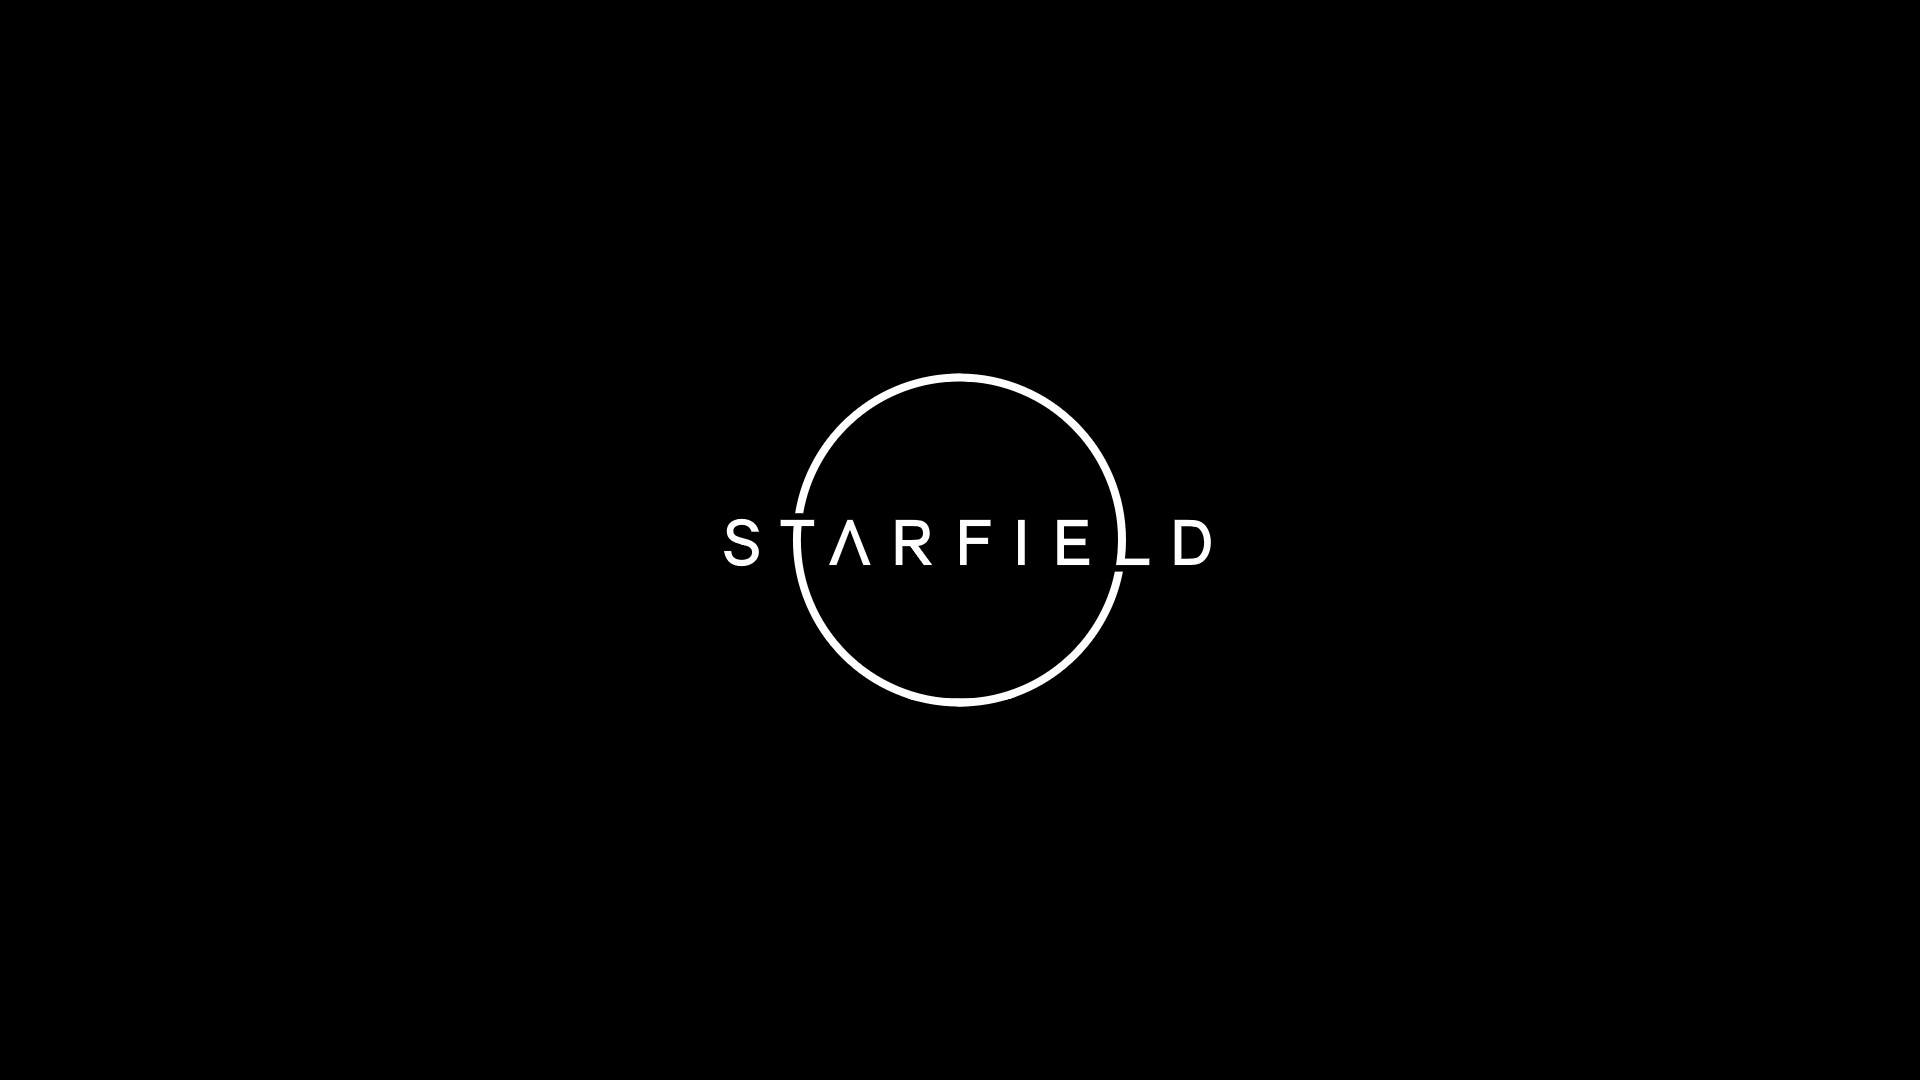 Xbox Boss Addresses His '11/10' Starfield Comment, Admits He 'Didn